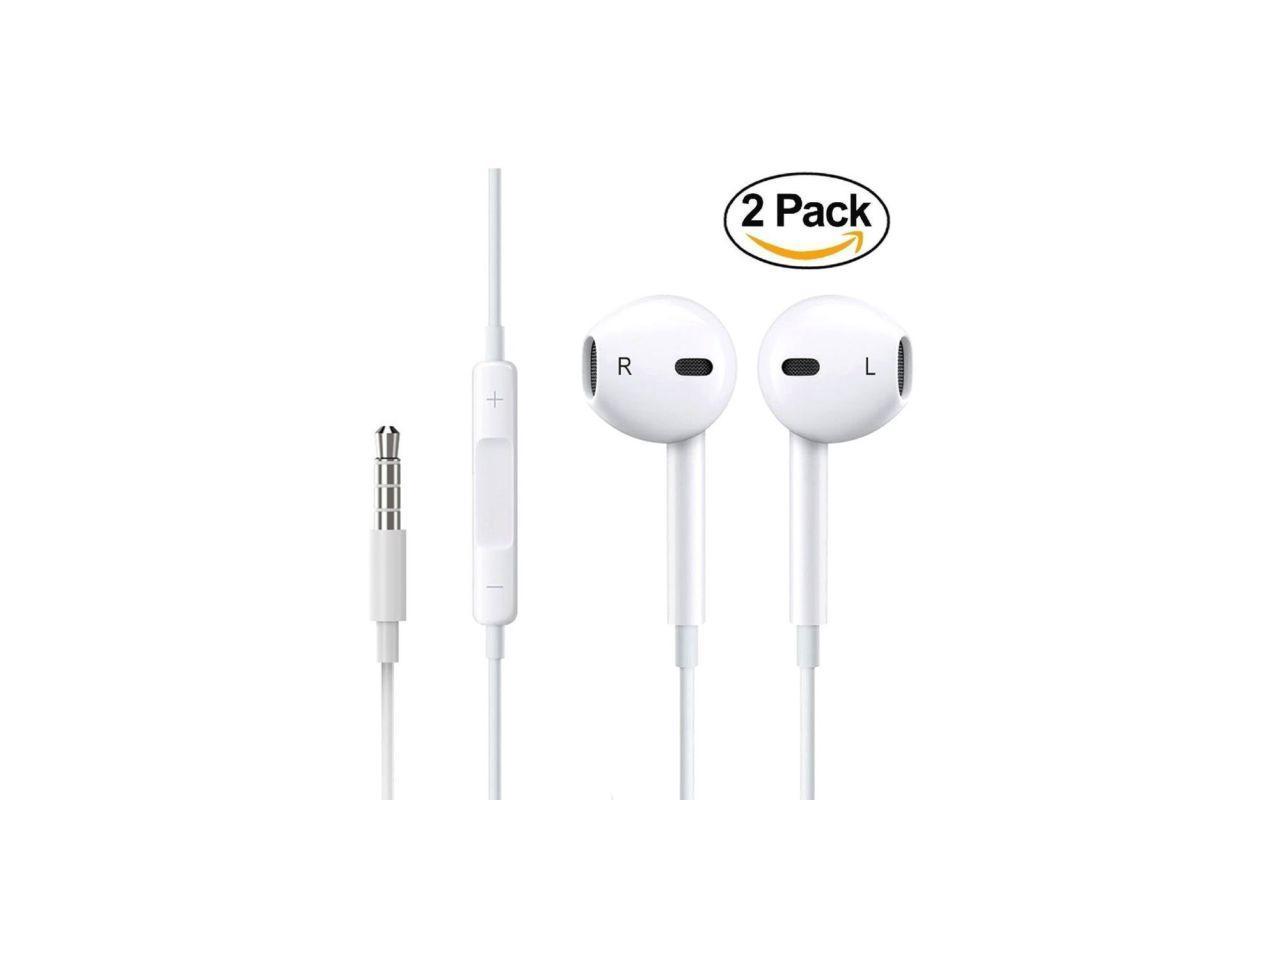 2 Pack Apple Earbuds Earphones With Microphone And Remote Control Wired Headphones 3 5mm Jack Ear Buds For For Iphone Ipad Ipod Samsung Galaxy And Android Cell Phones Apple Earbuds Earphones With Mic